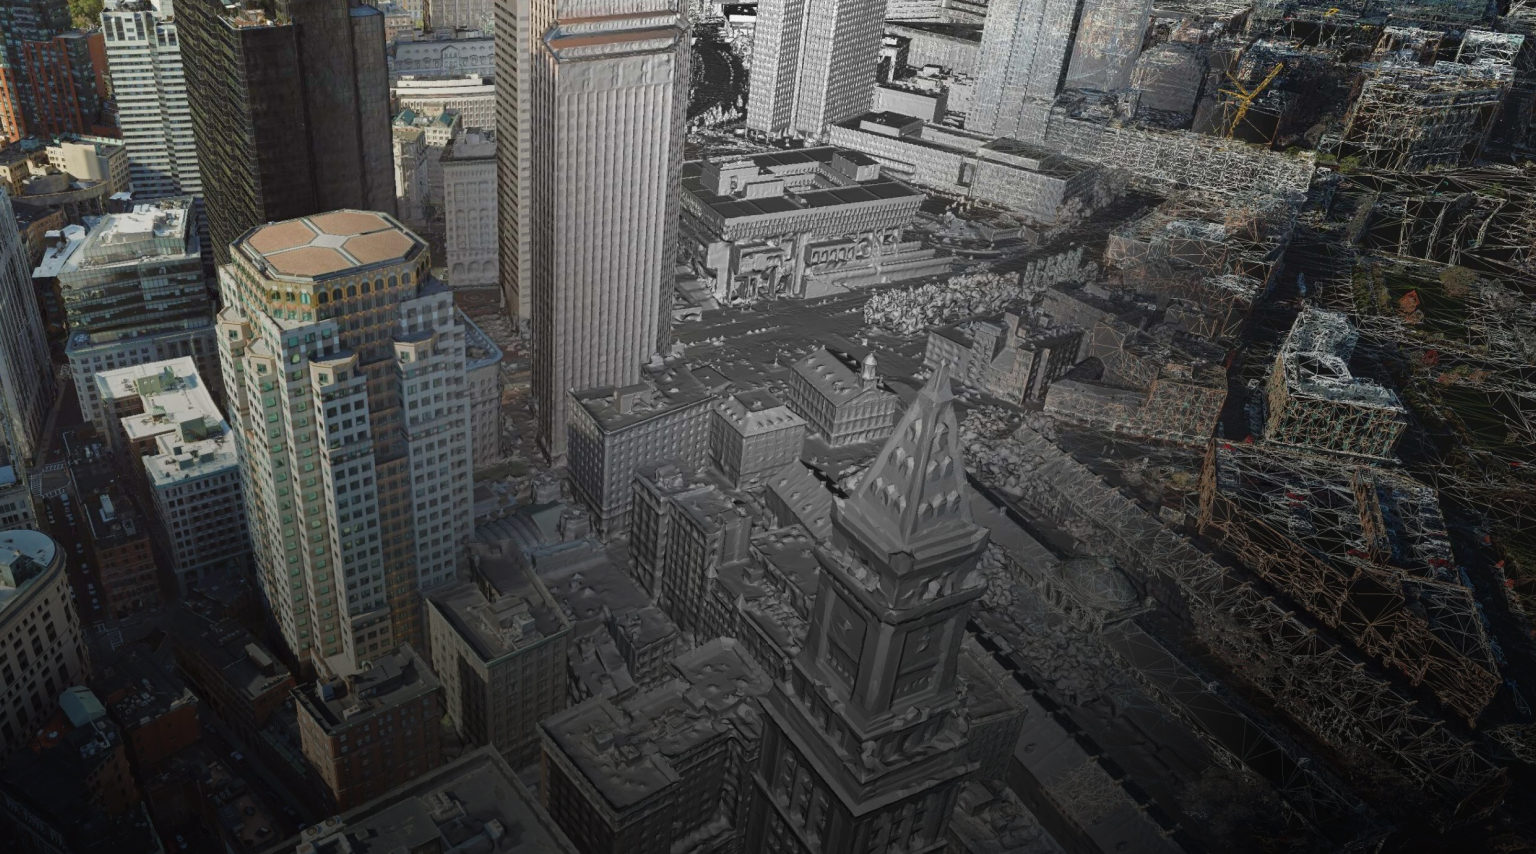 Photogrammetry image of a downtown area with large and small 3D buildings